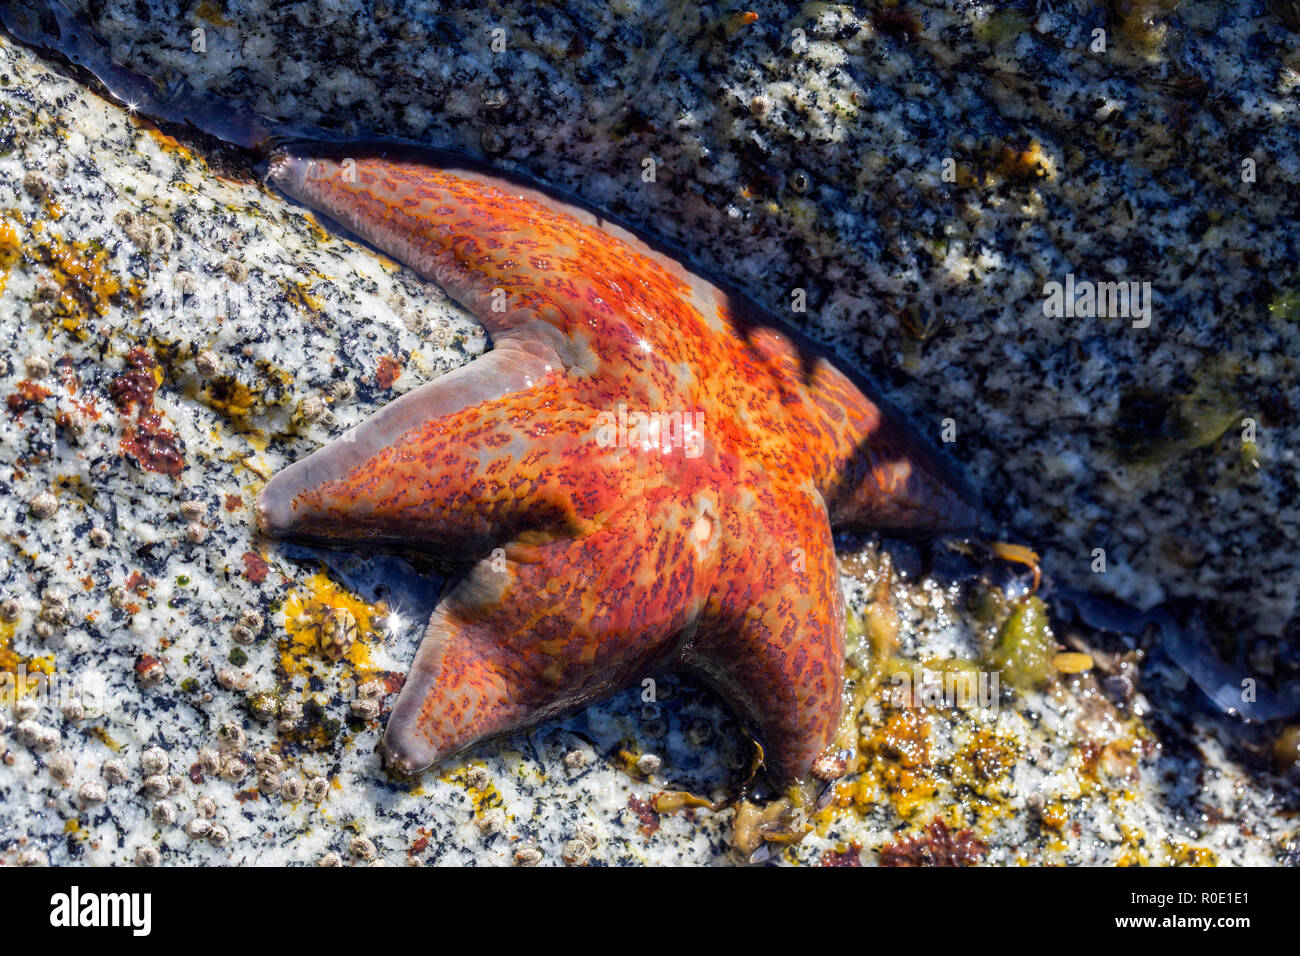 Dynamic image of red starfish in low tide water on half light half dark rocky ocean bed, can be used as a background or greeting card Stock Photo